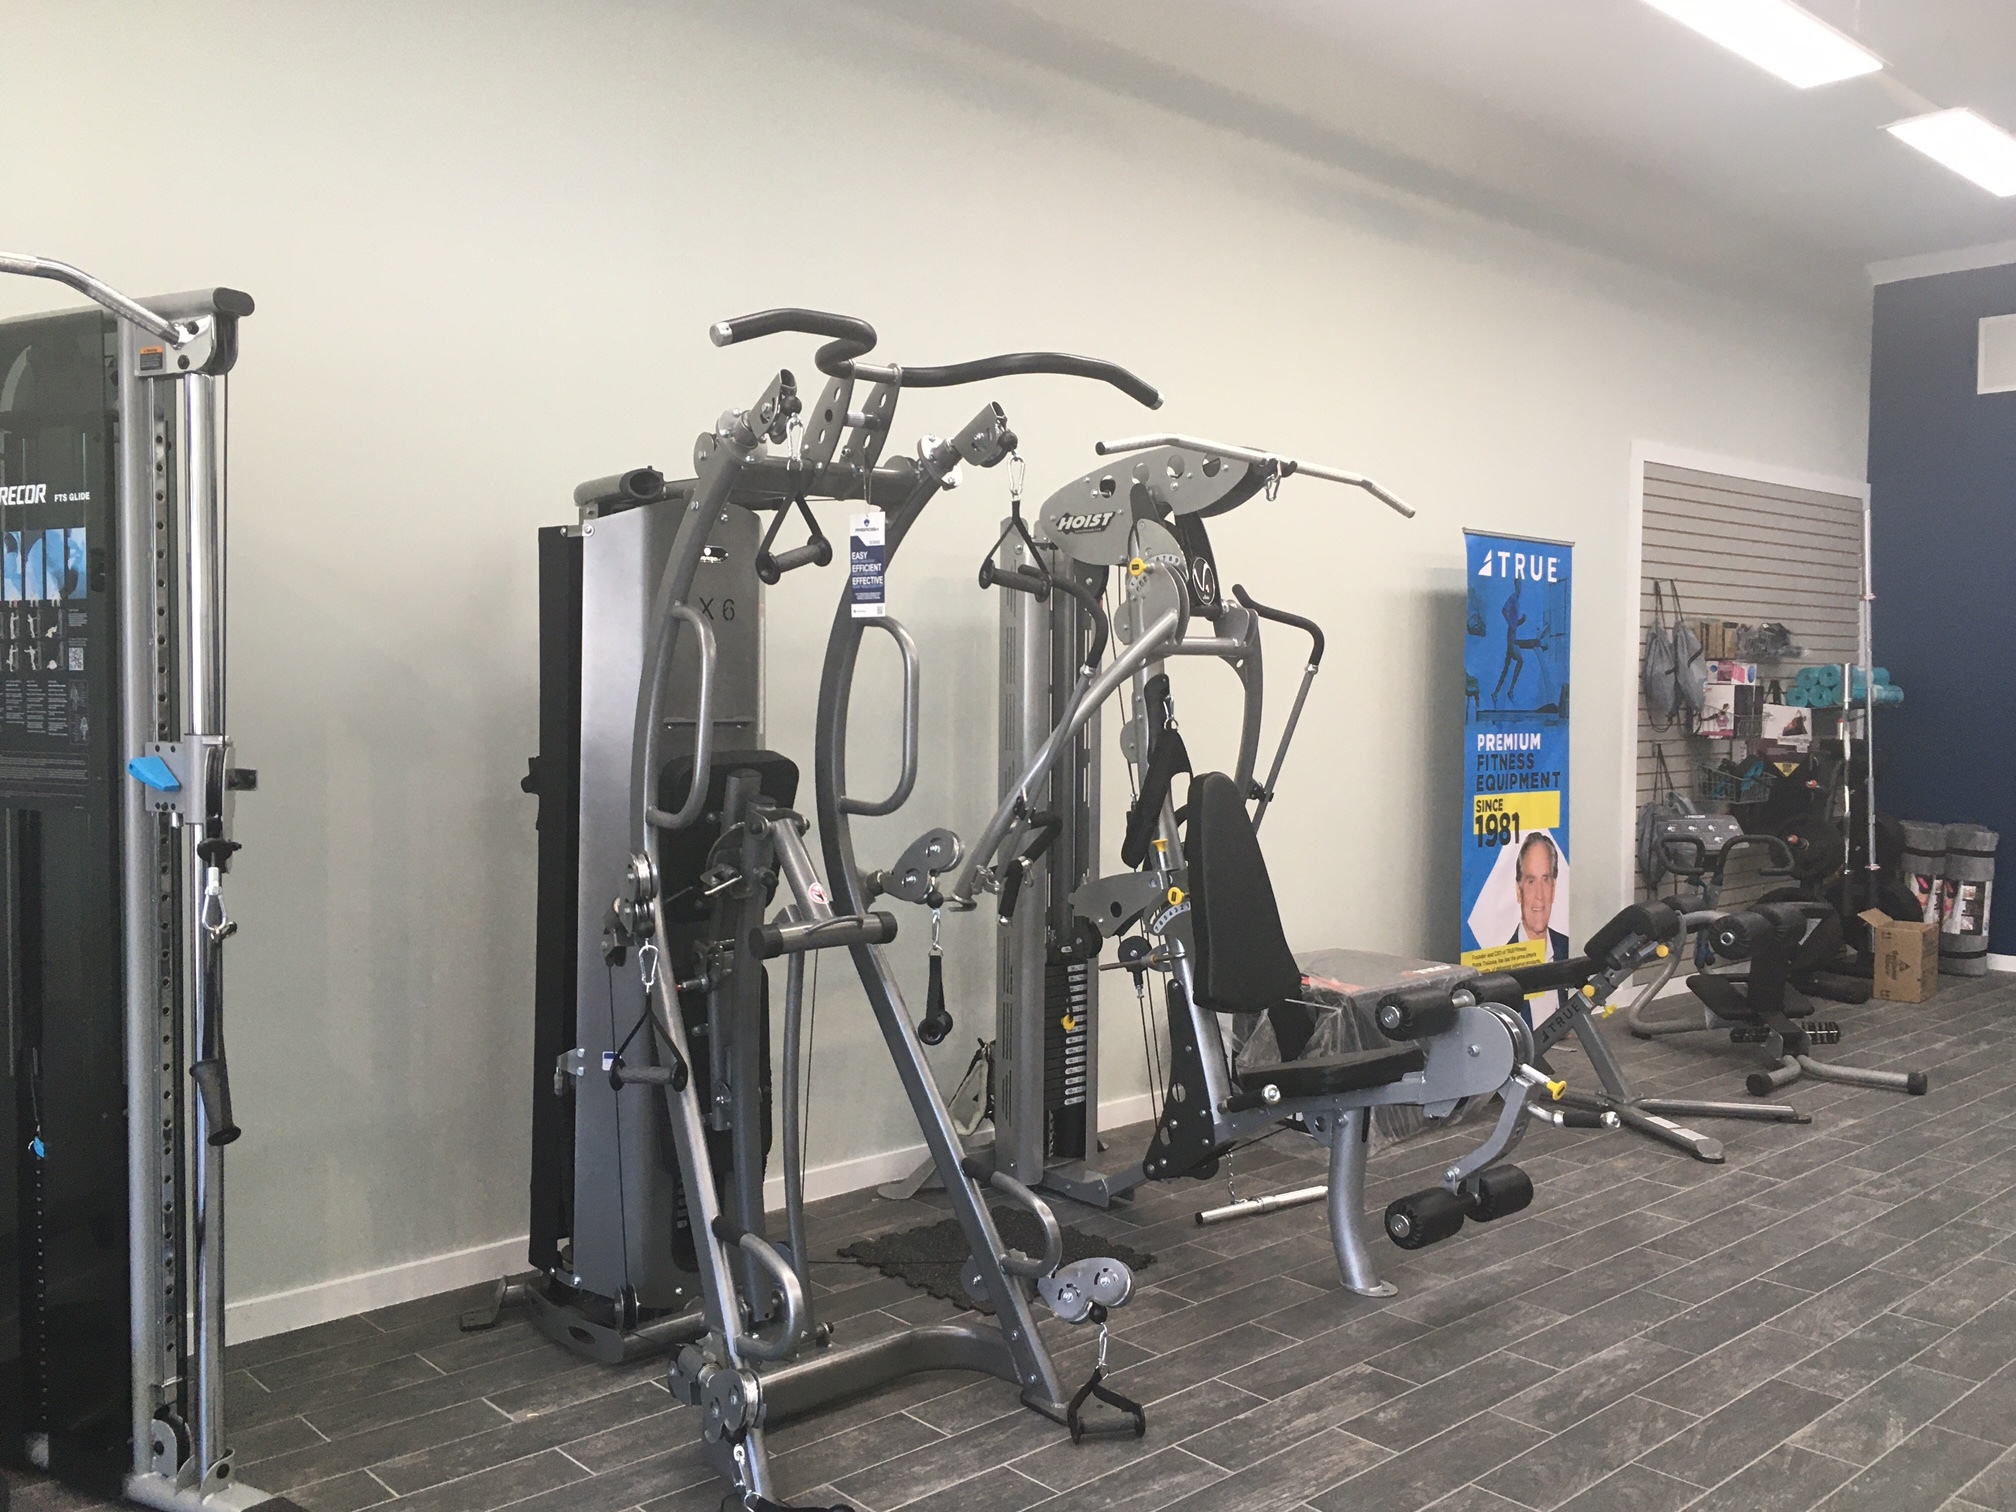 Gym Tech on Hill Street in Southampton Village offers home and commercial fitness equipment.